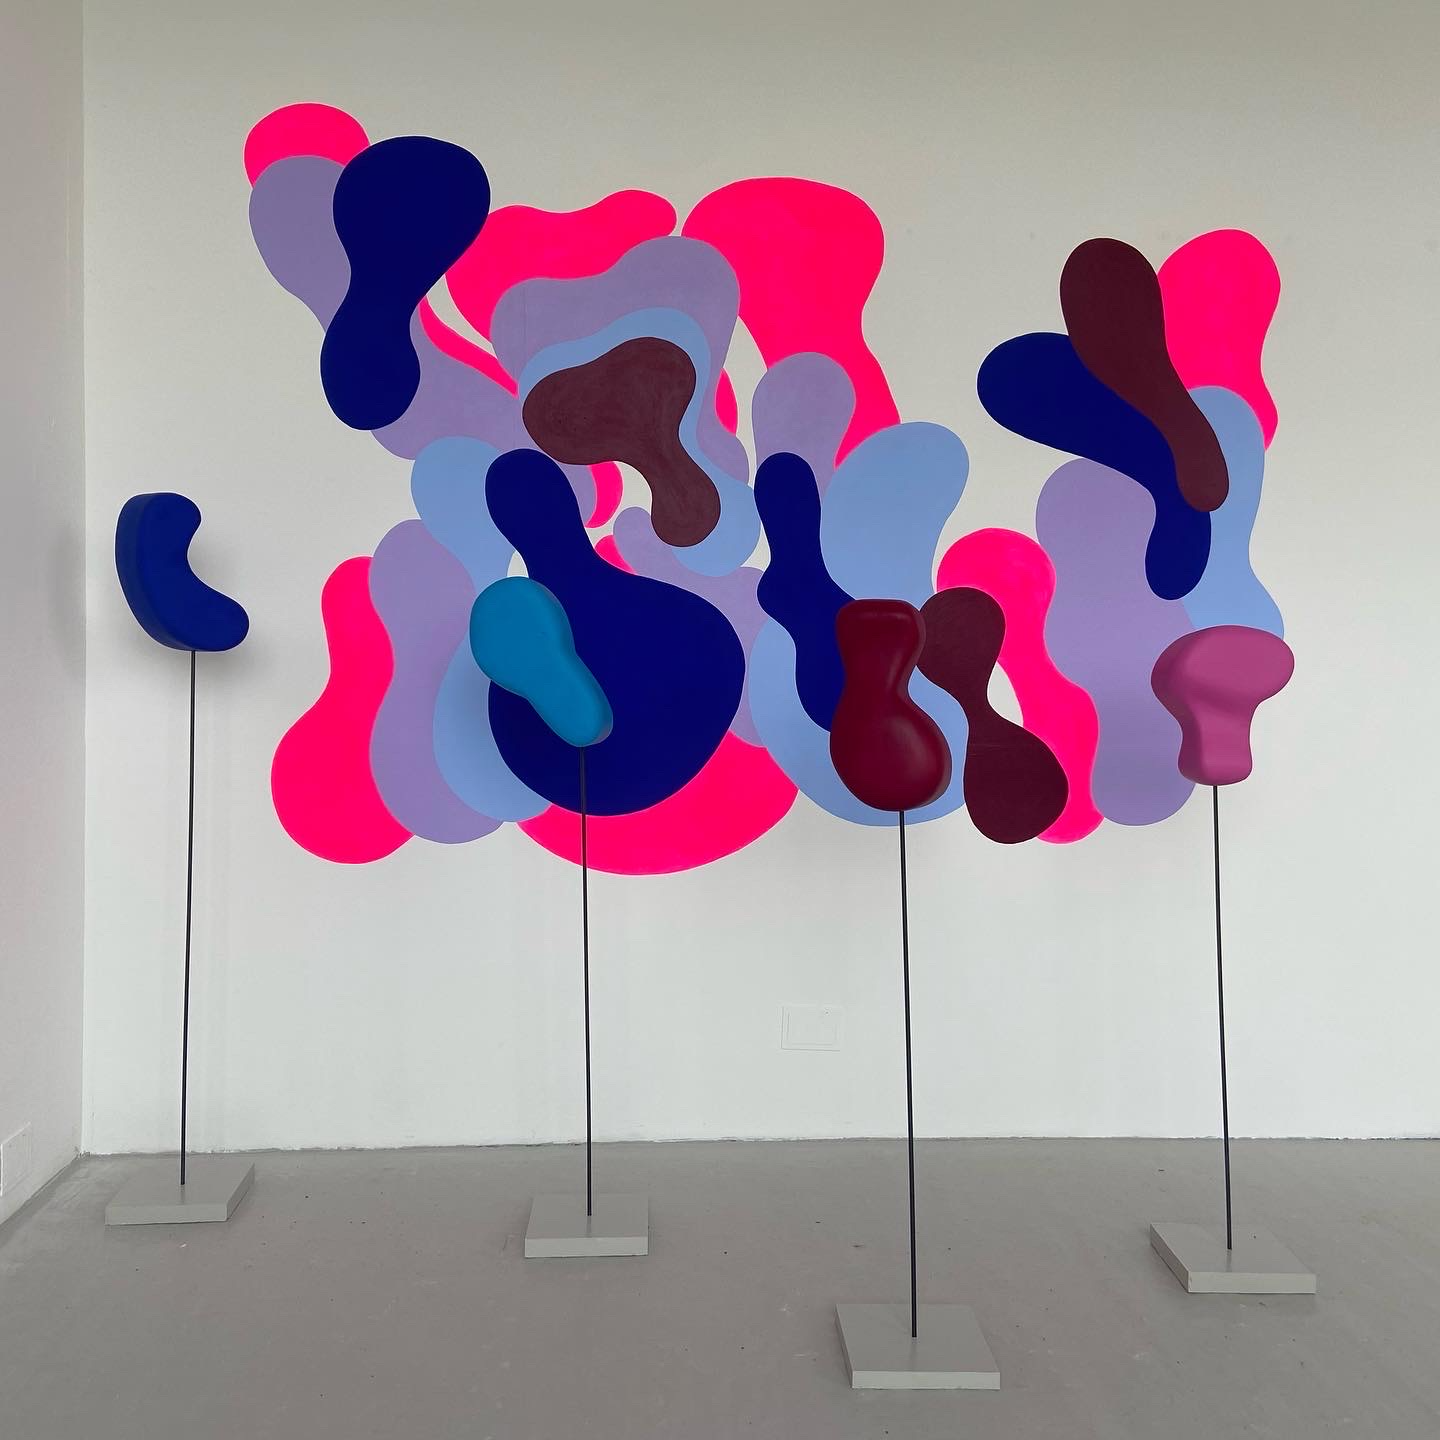 BA Fine Art work by Harriet Reeve showing a colourful abstract instillation